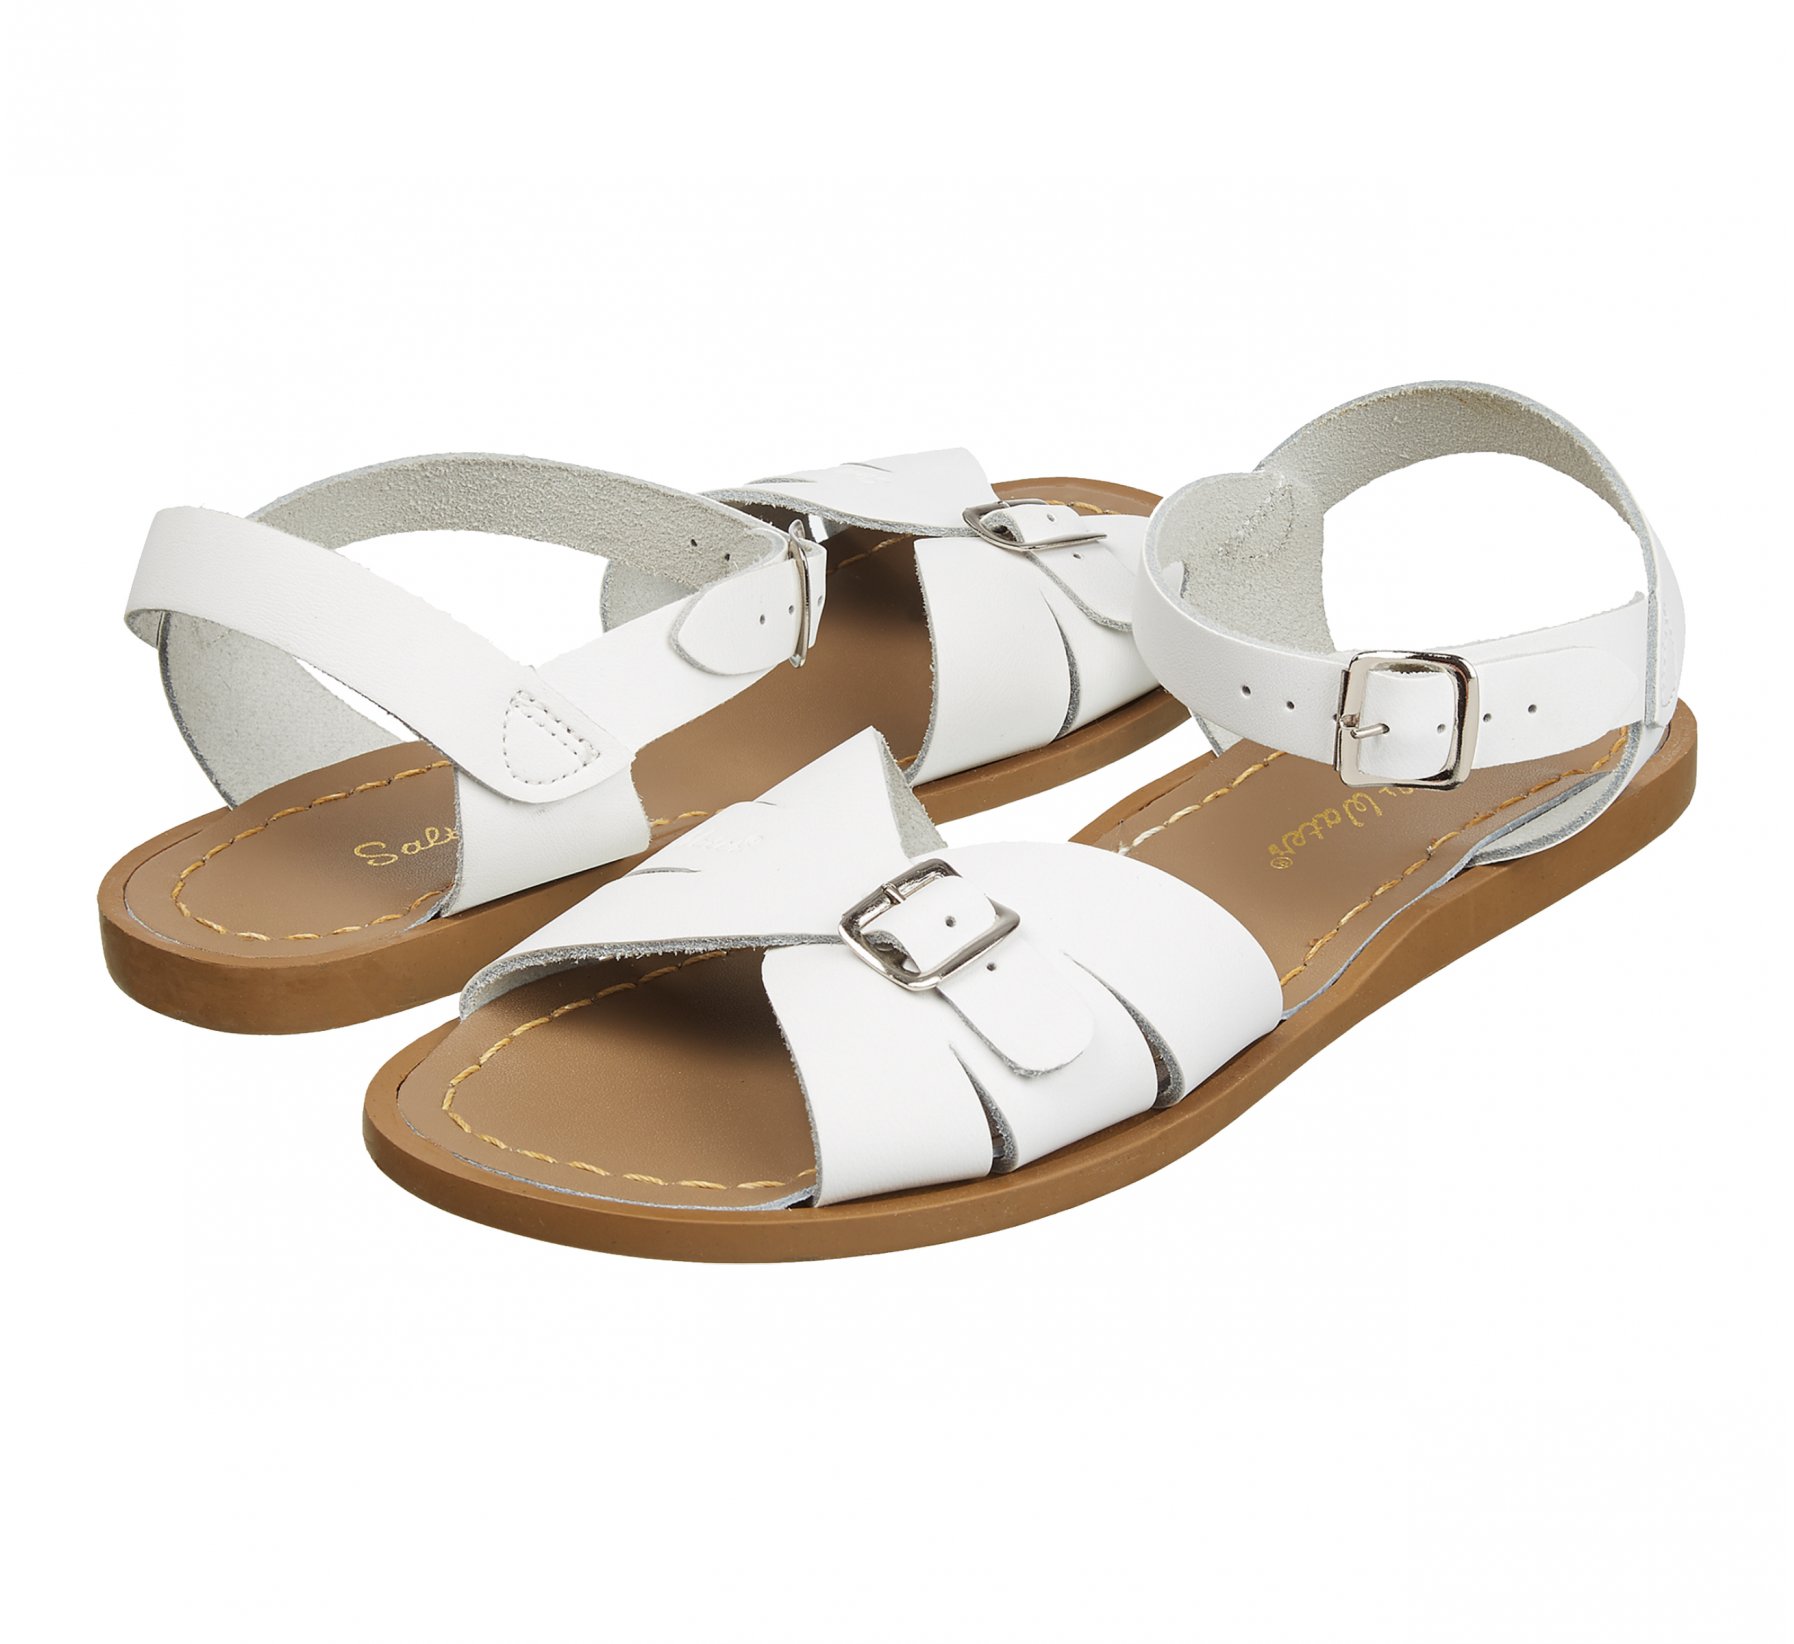 Fitflop New Fino sparkle slider - Sandals size 6.5 White Jewell design -  Đức An Phát